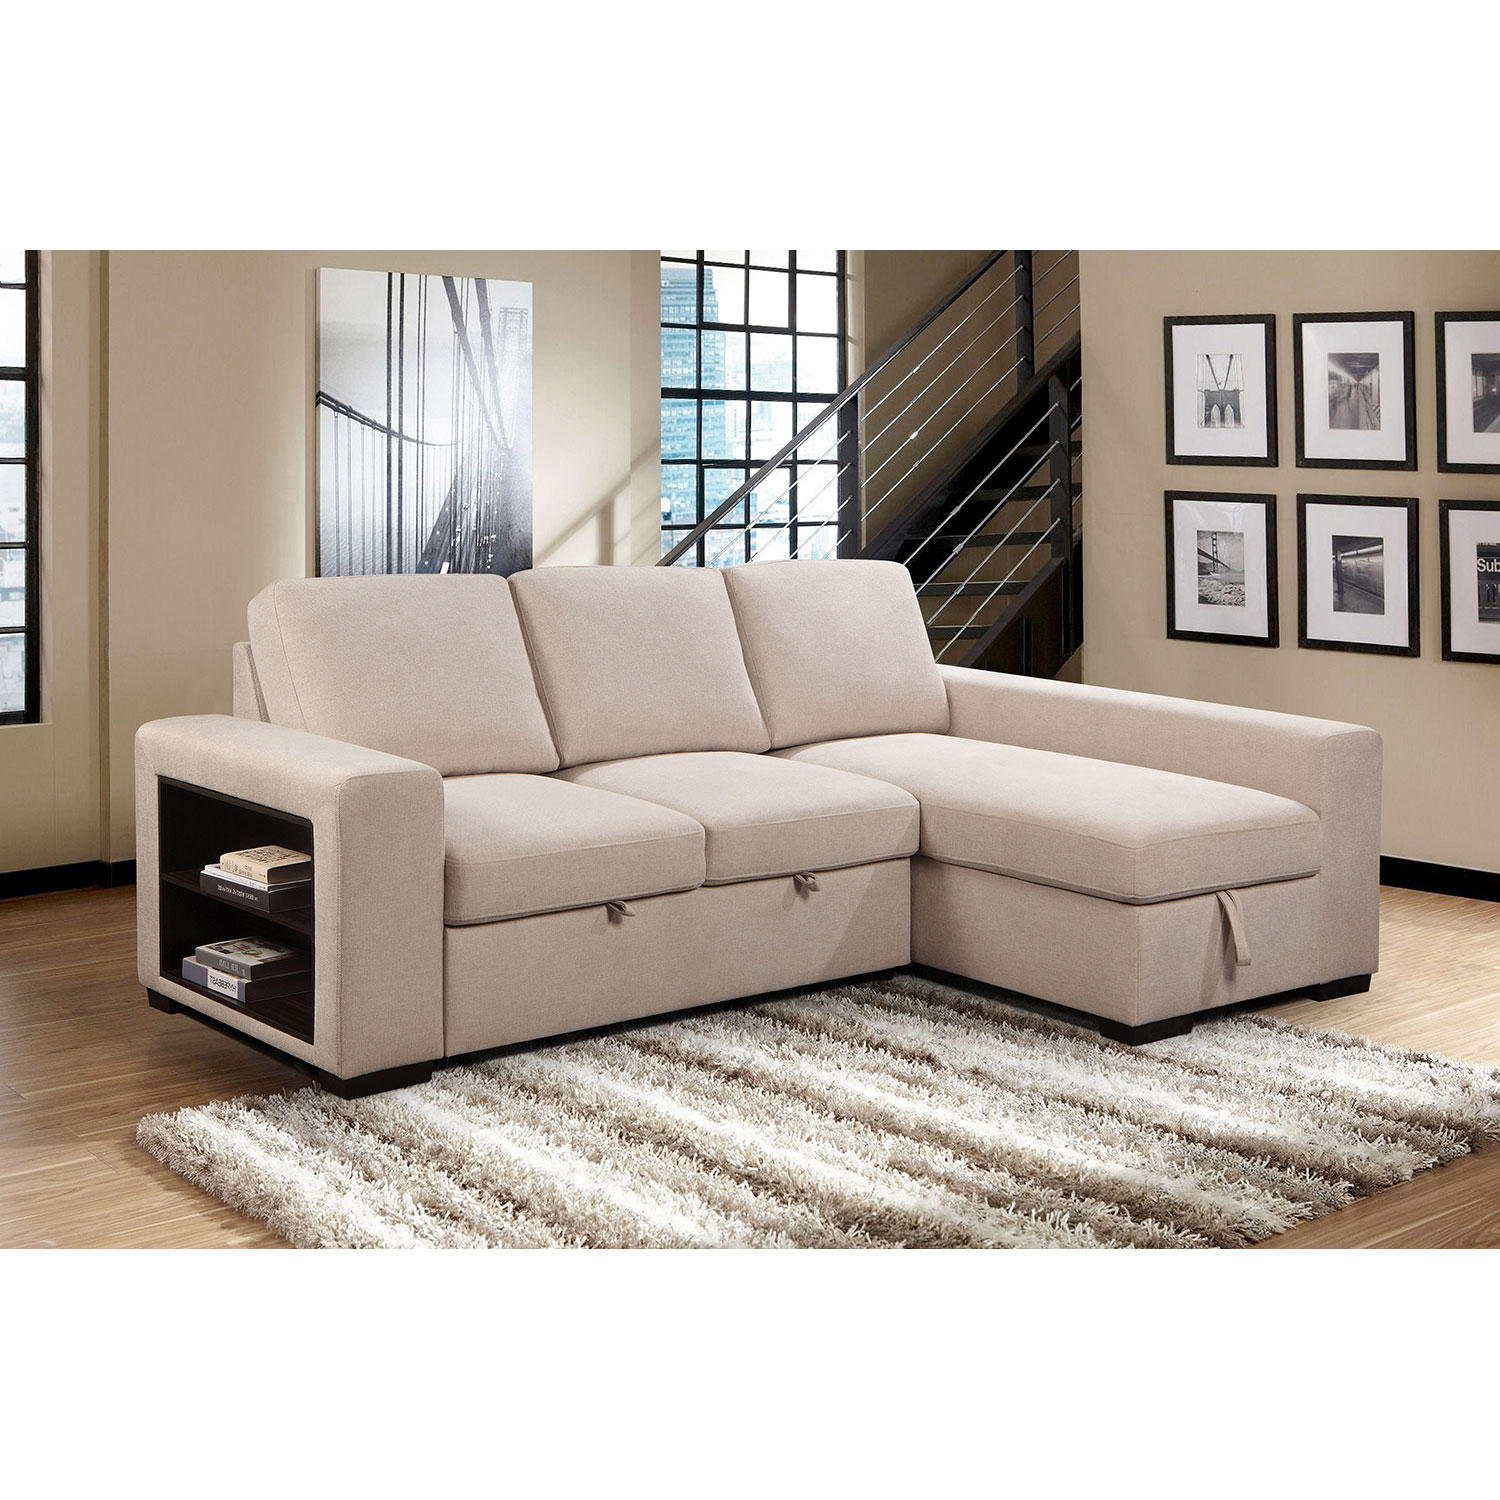 Abbyson Living Evan Stain-Resistant Sectional Sofa with Storage and Pullout Bed